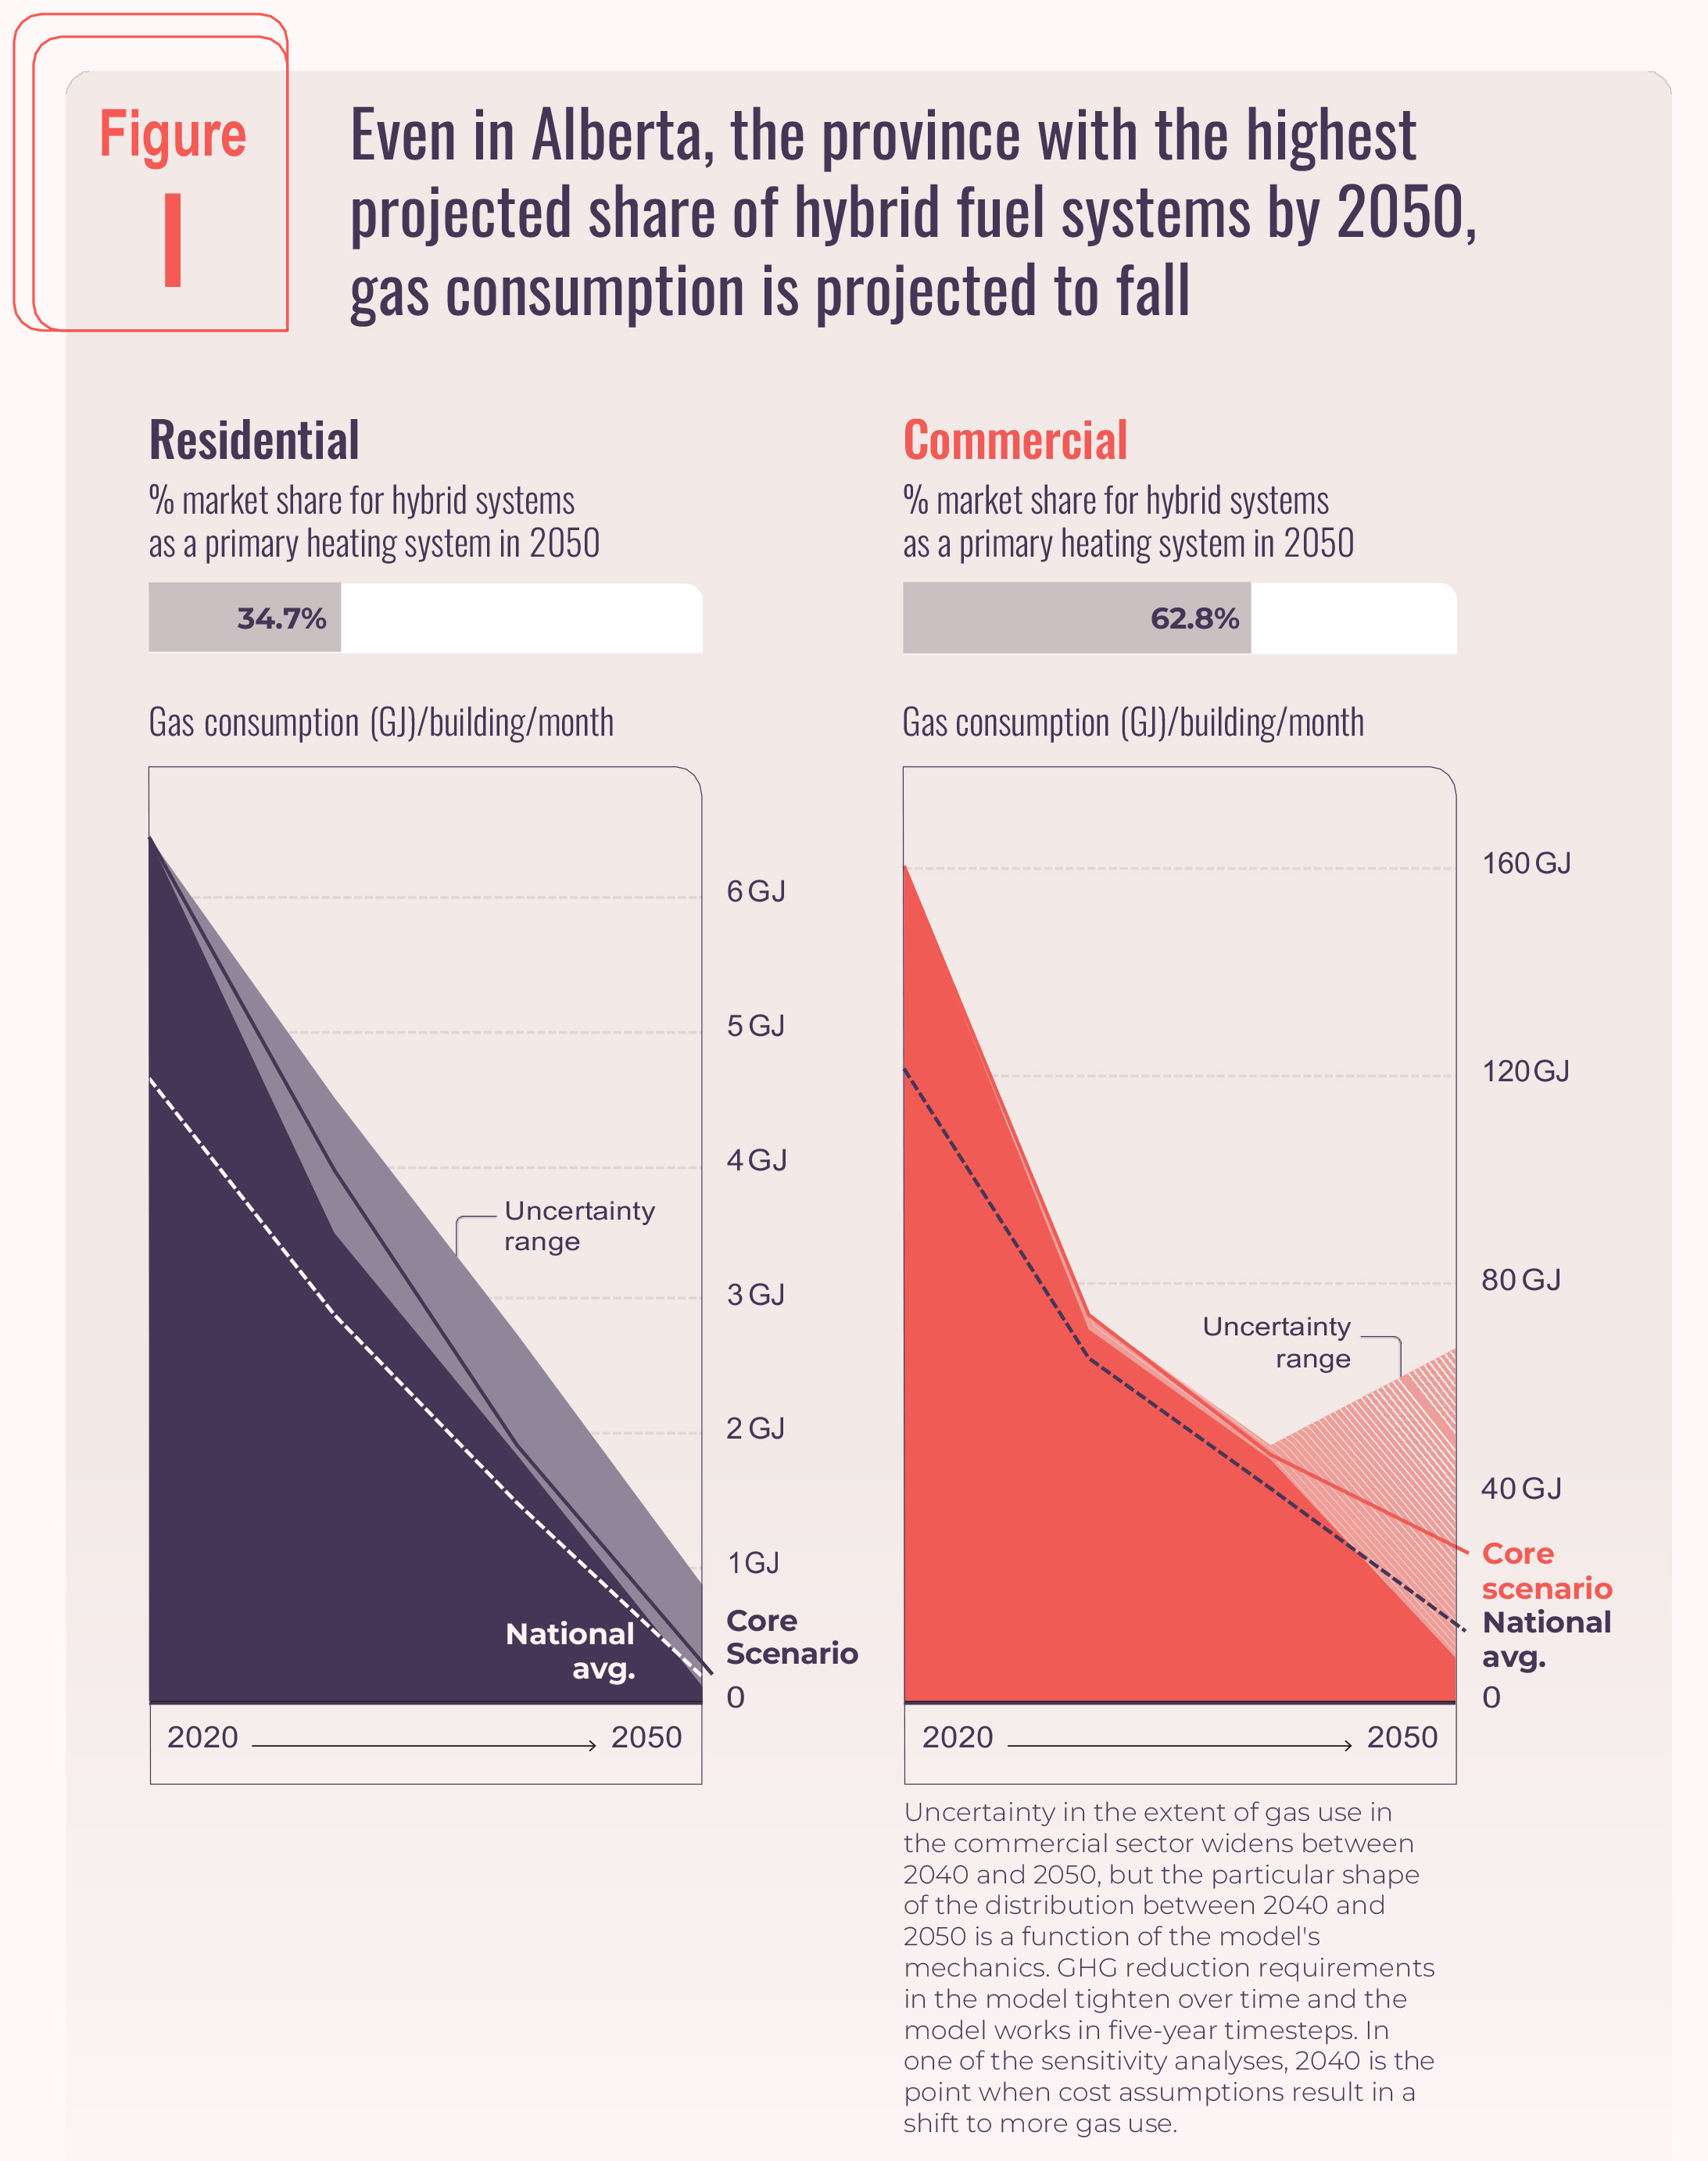 Figure I shows that even in Alberta, the province with the highest projected share of hybrid fuel systems by 2050, gas consumption is projected to fall.